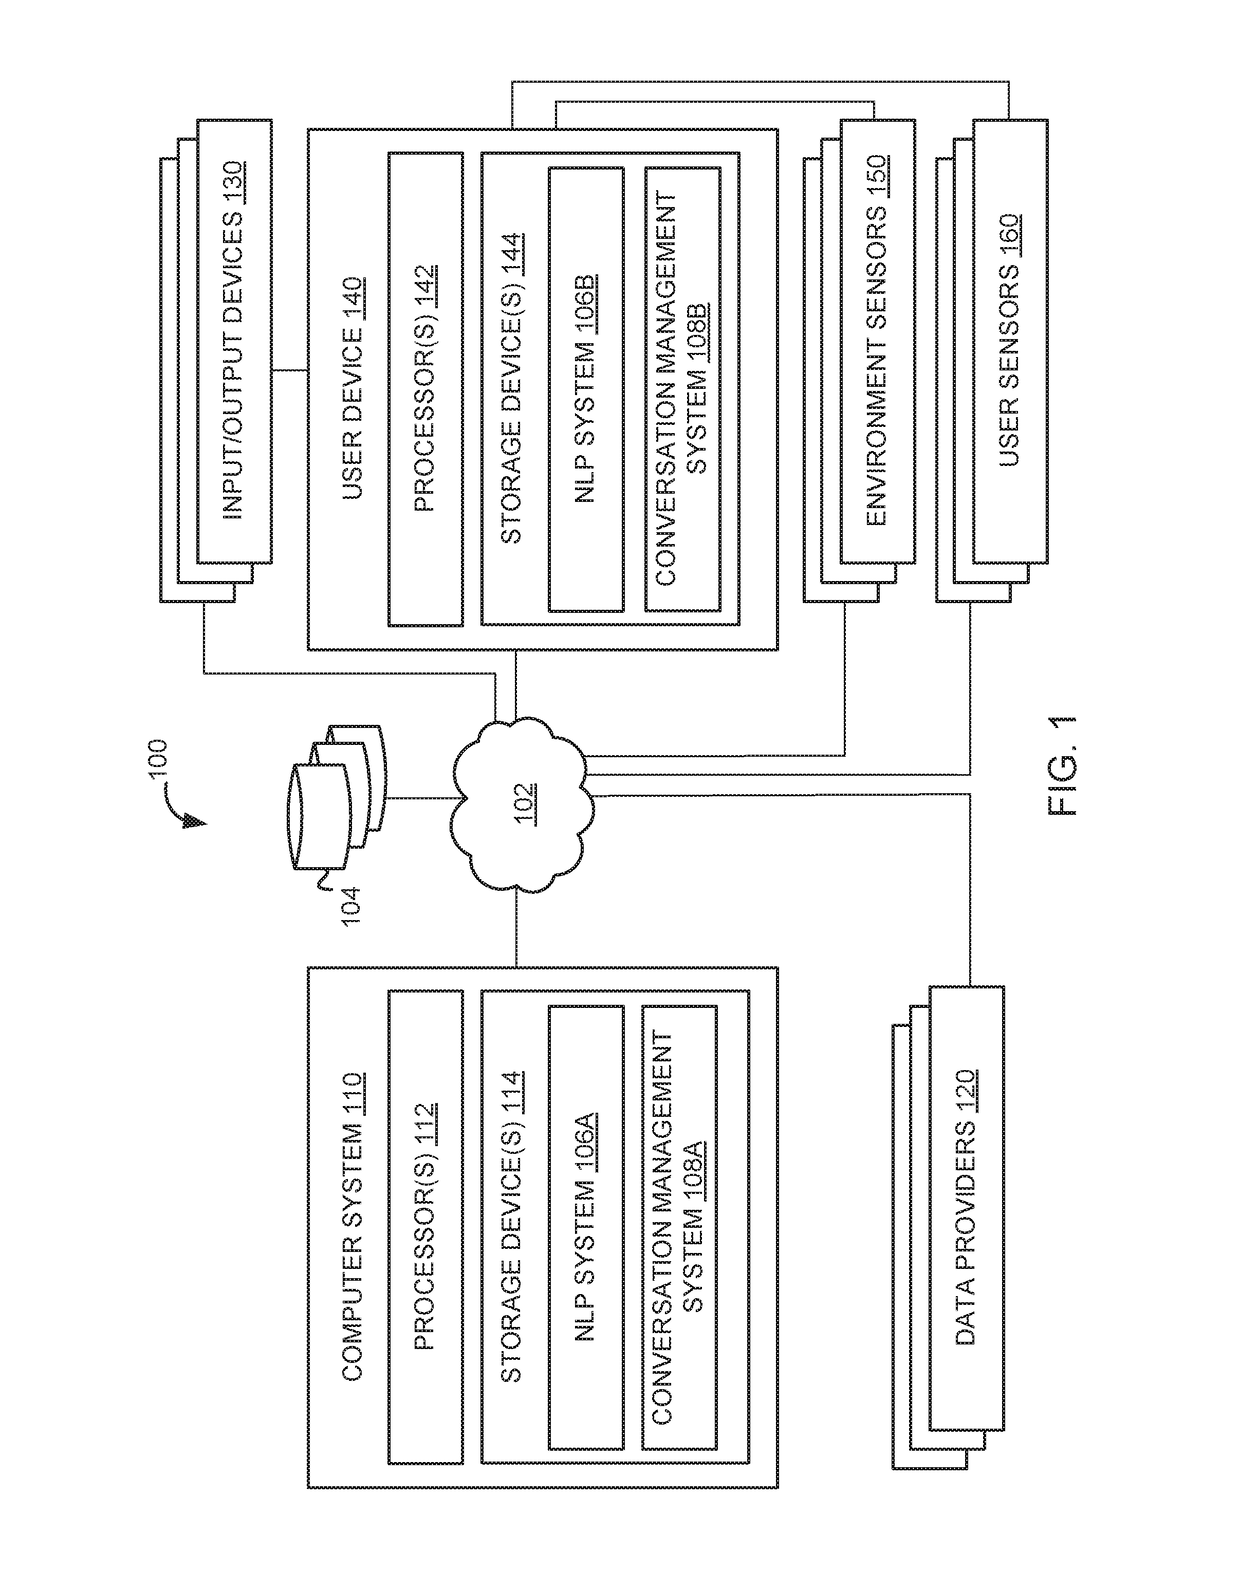 System and method of conversational adjustment based on user's cognitive state and/or situational state